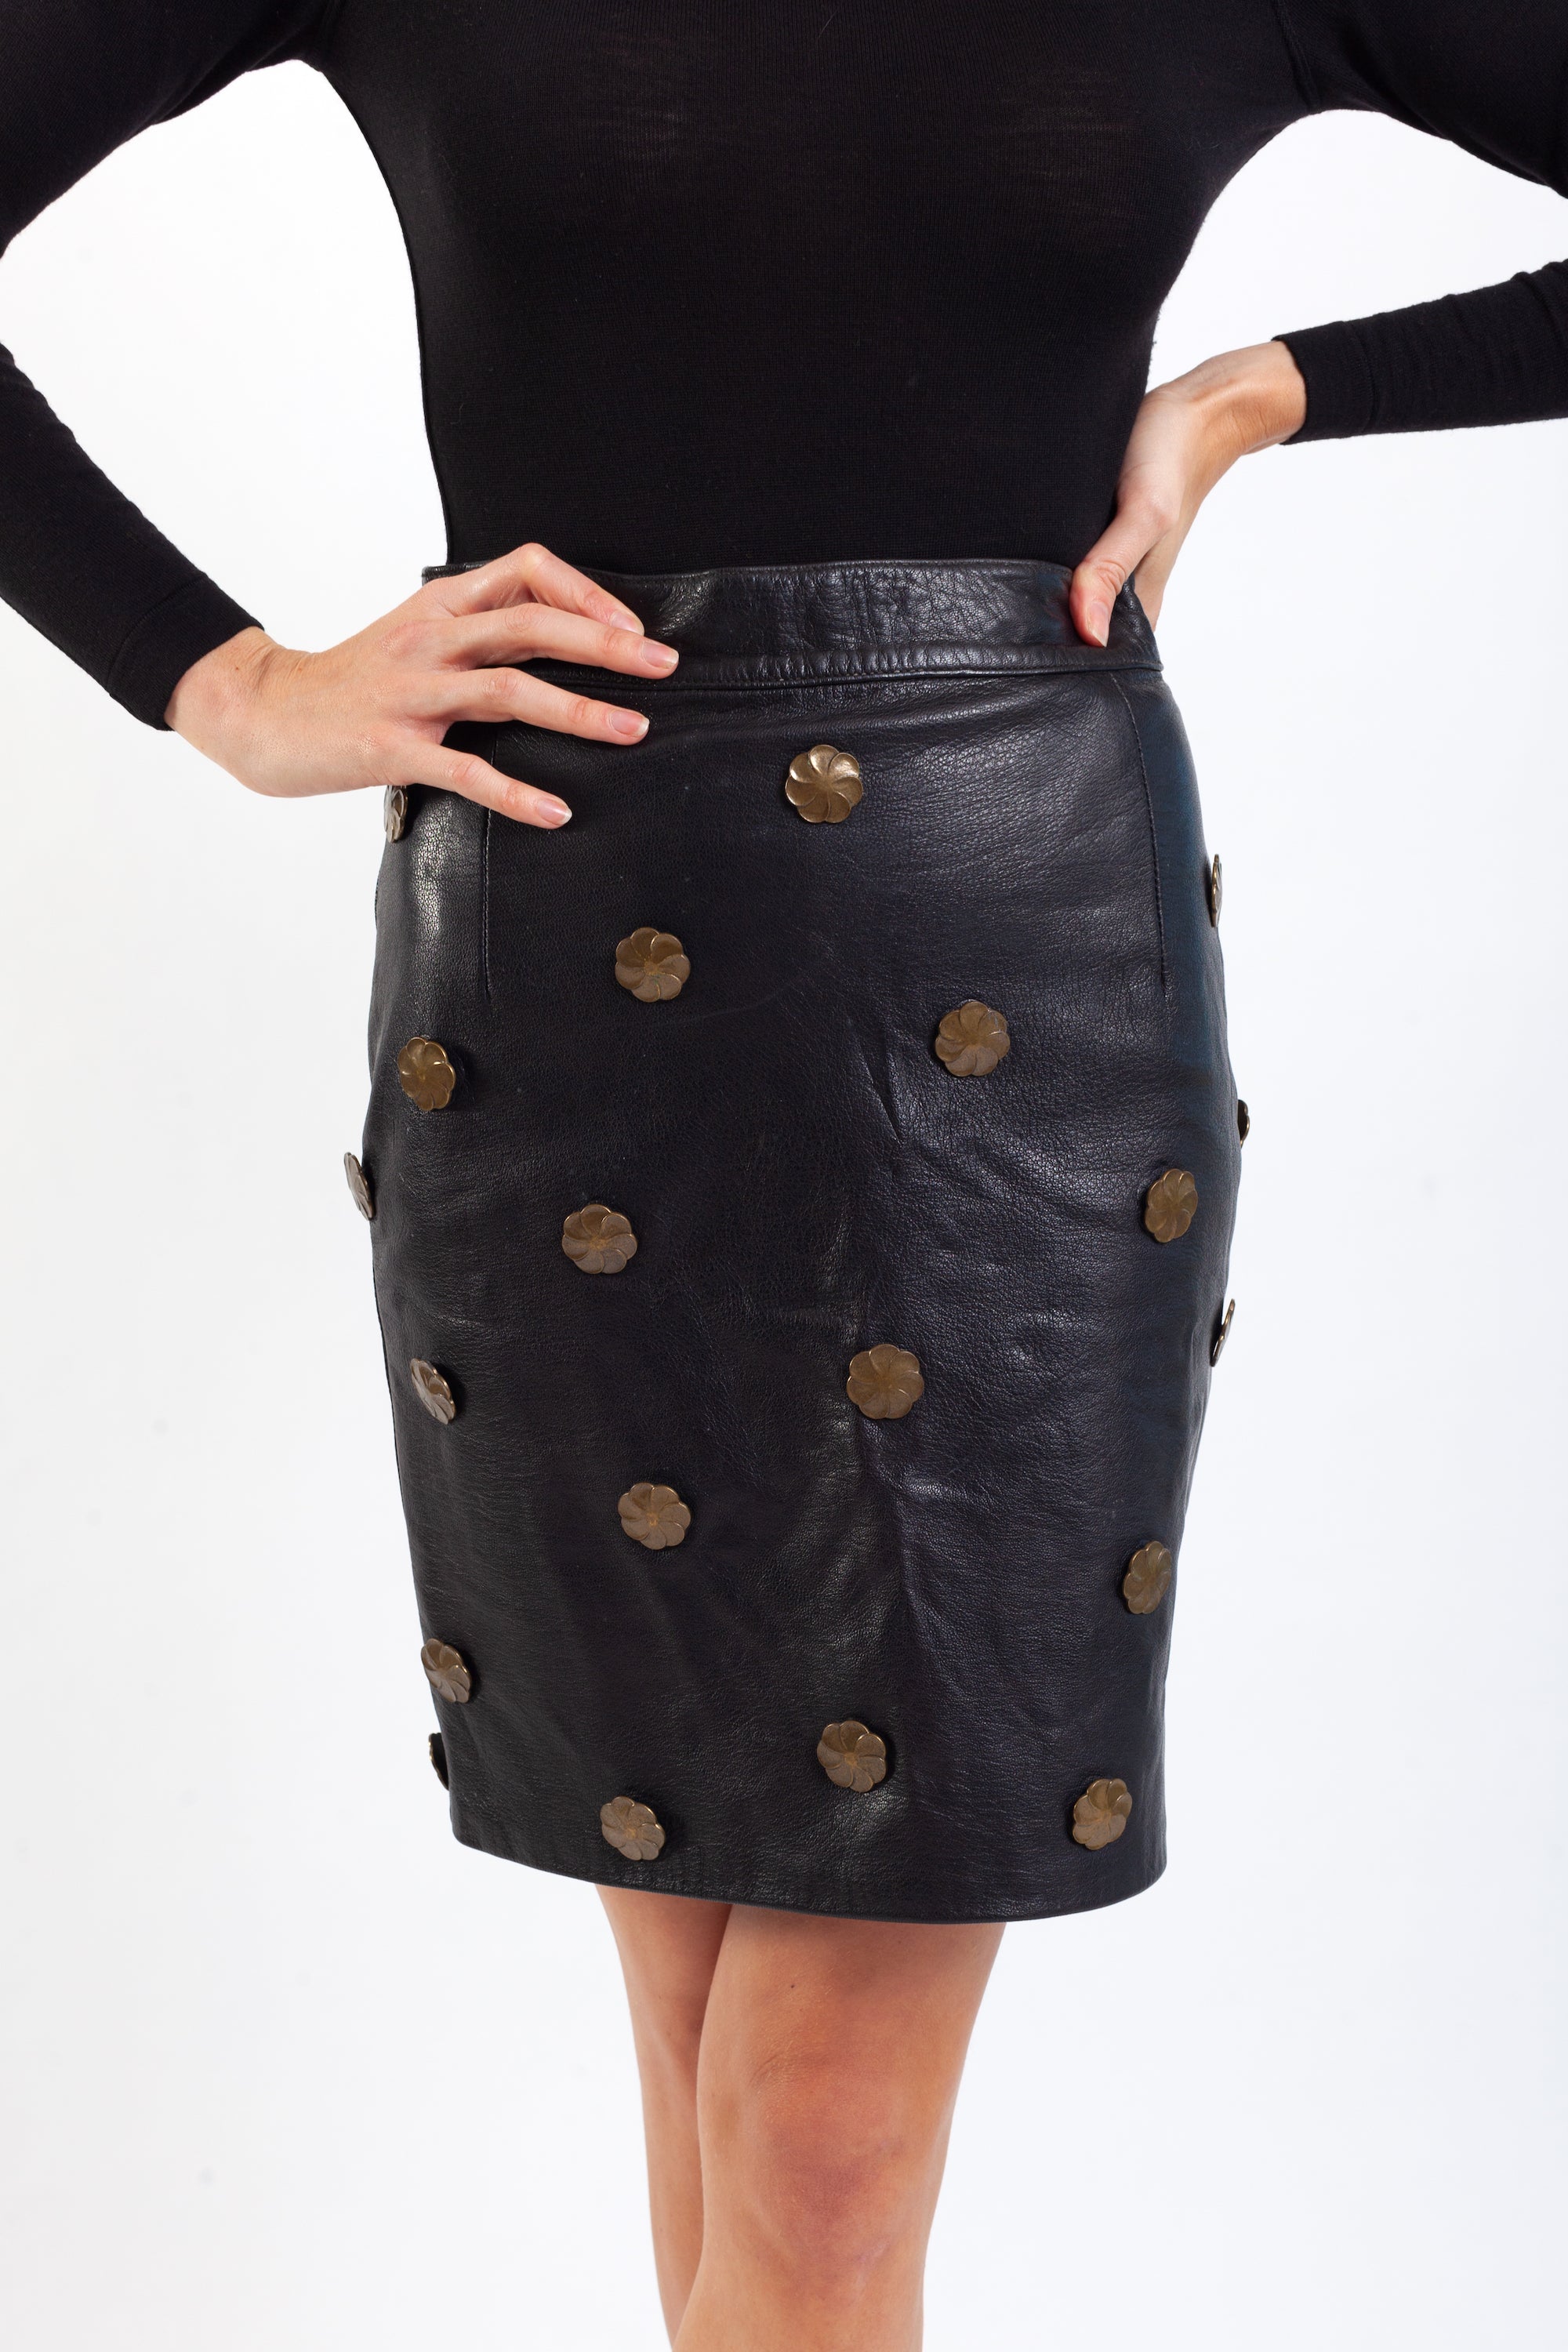 Moschino <br> F/W 1988 leather skirt with bronze medallions